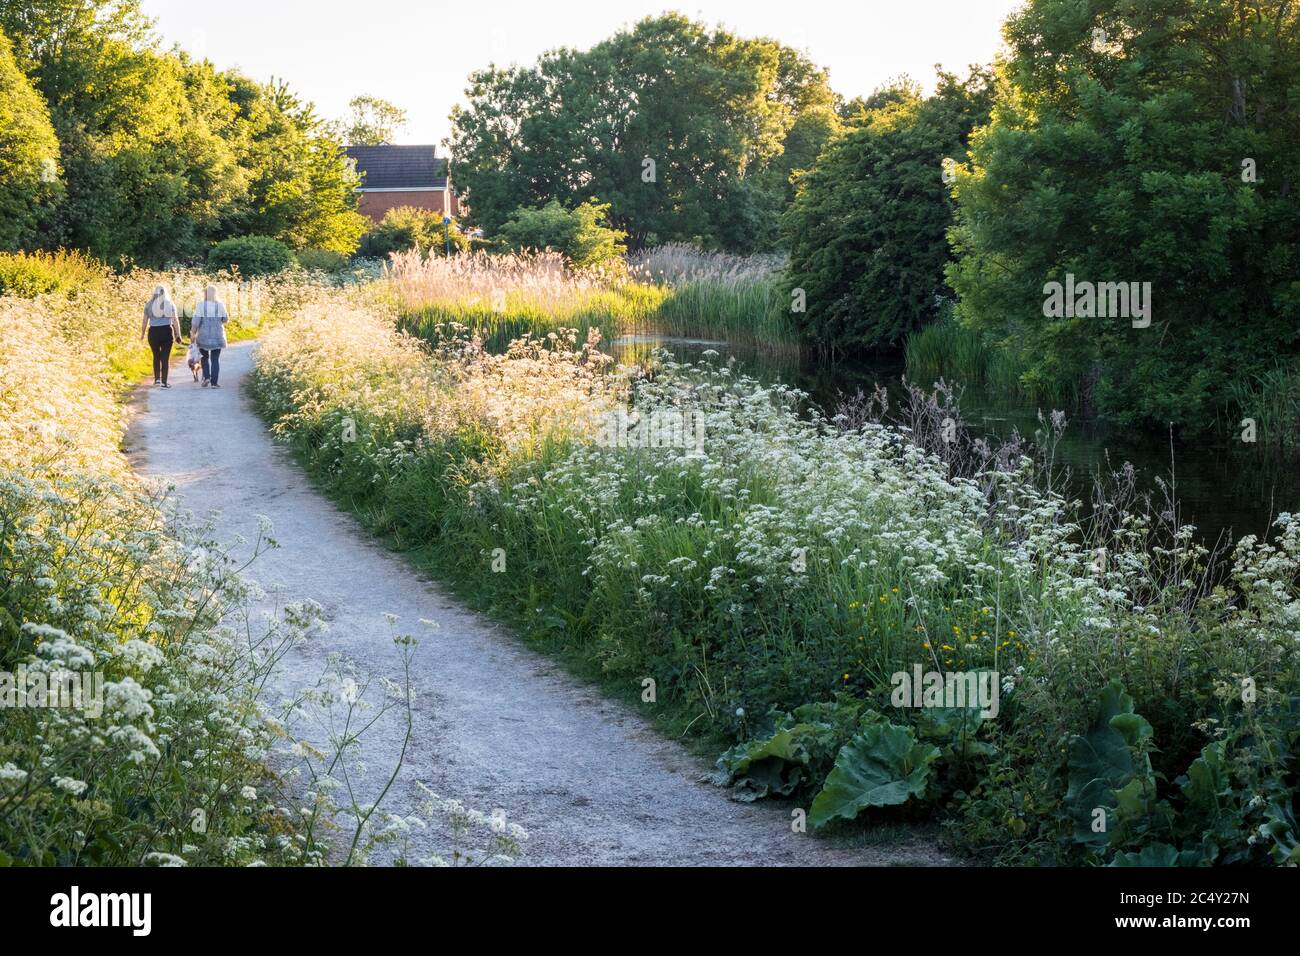 People walking along a footpath on a Spring evening beside the Grantham Canal, Gamston, West Bridgford, Nottinghamshire, England, UK Stock Photo